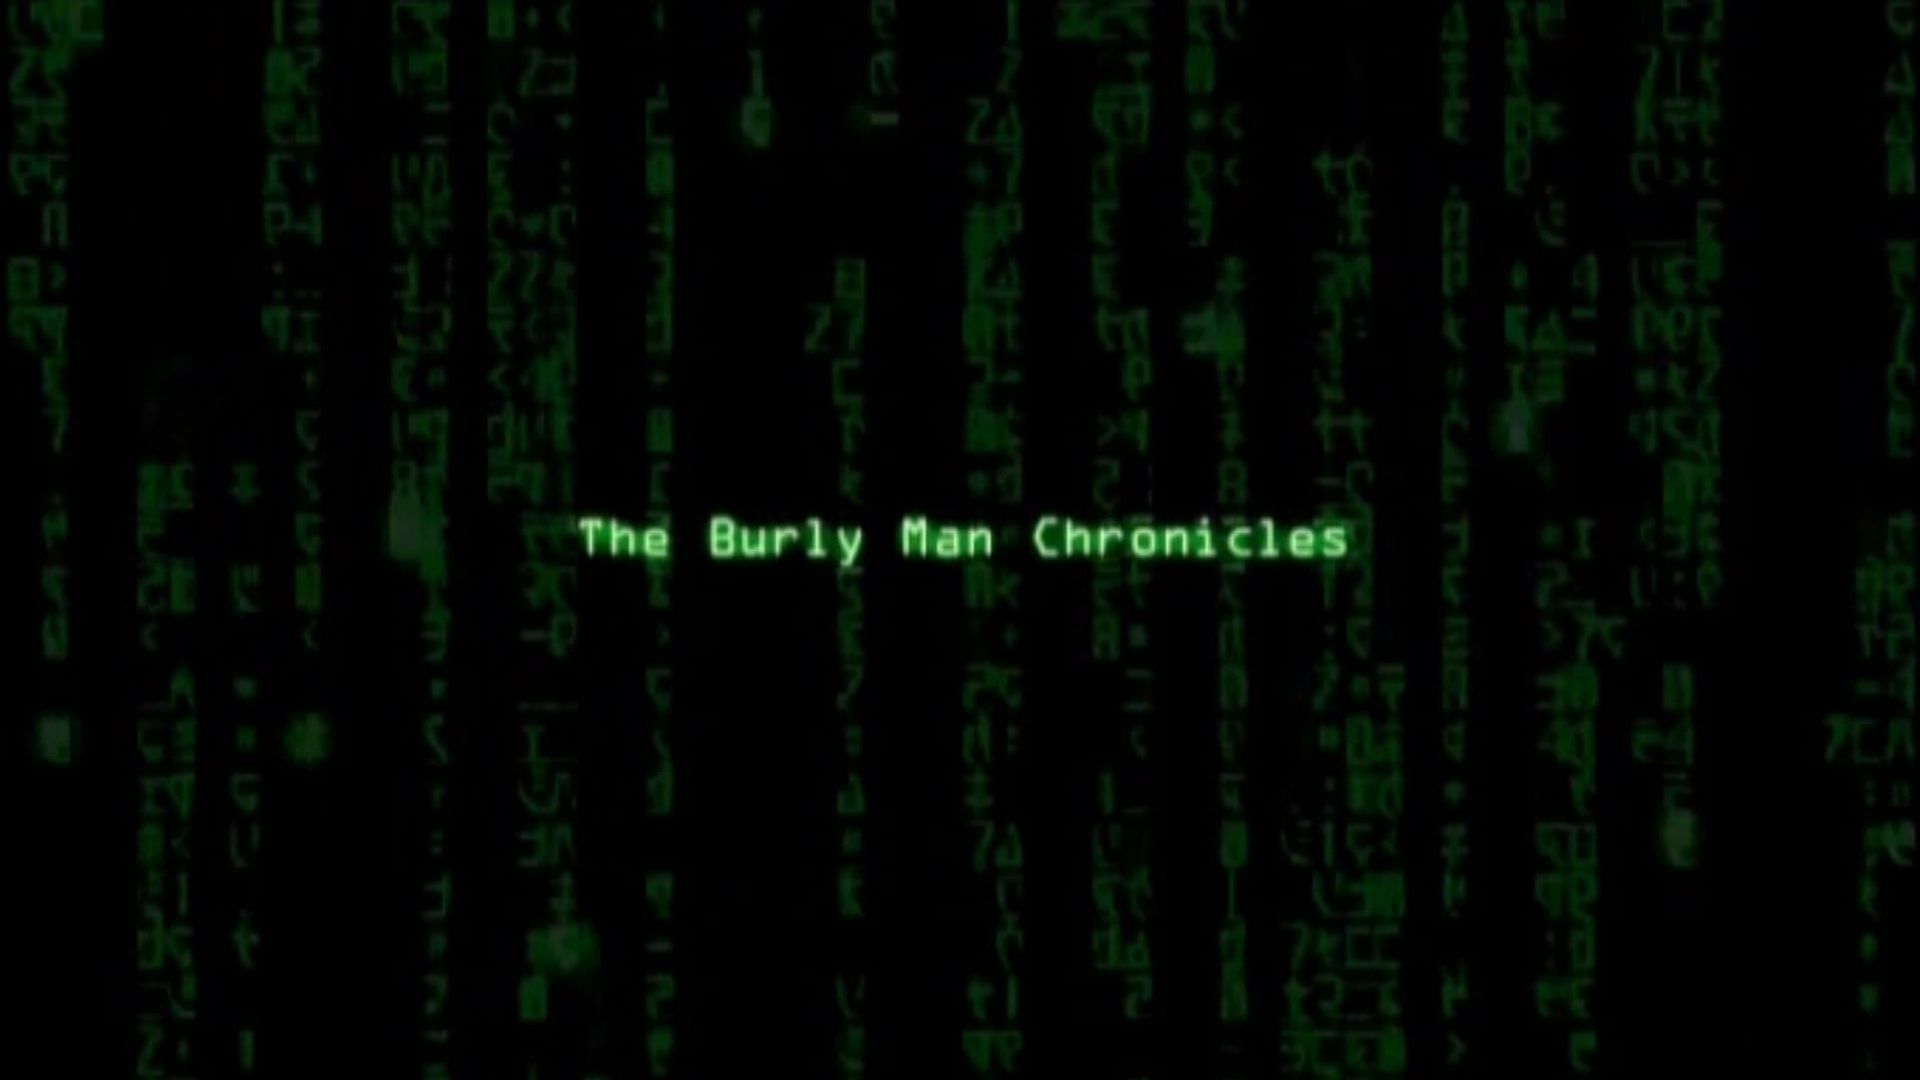 The Burly Man Chronicles background